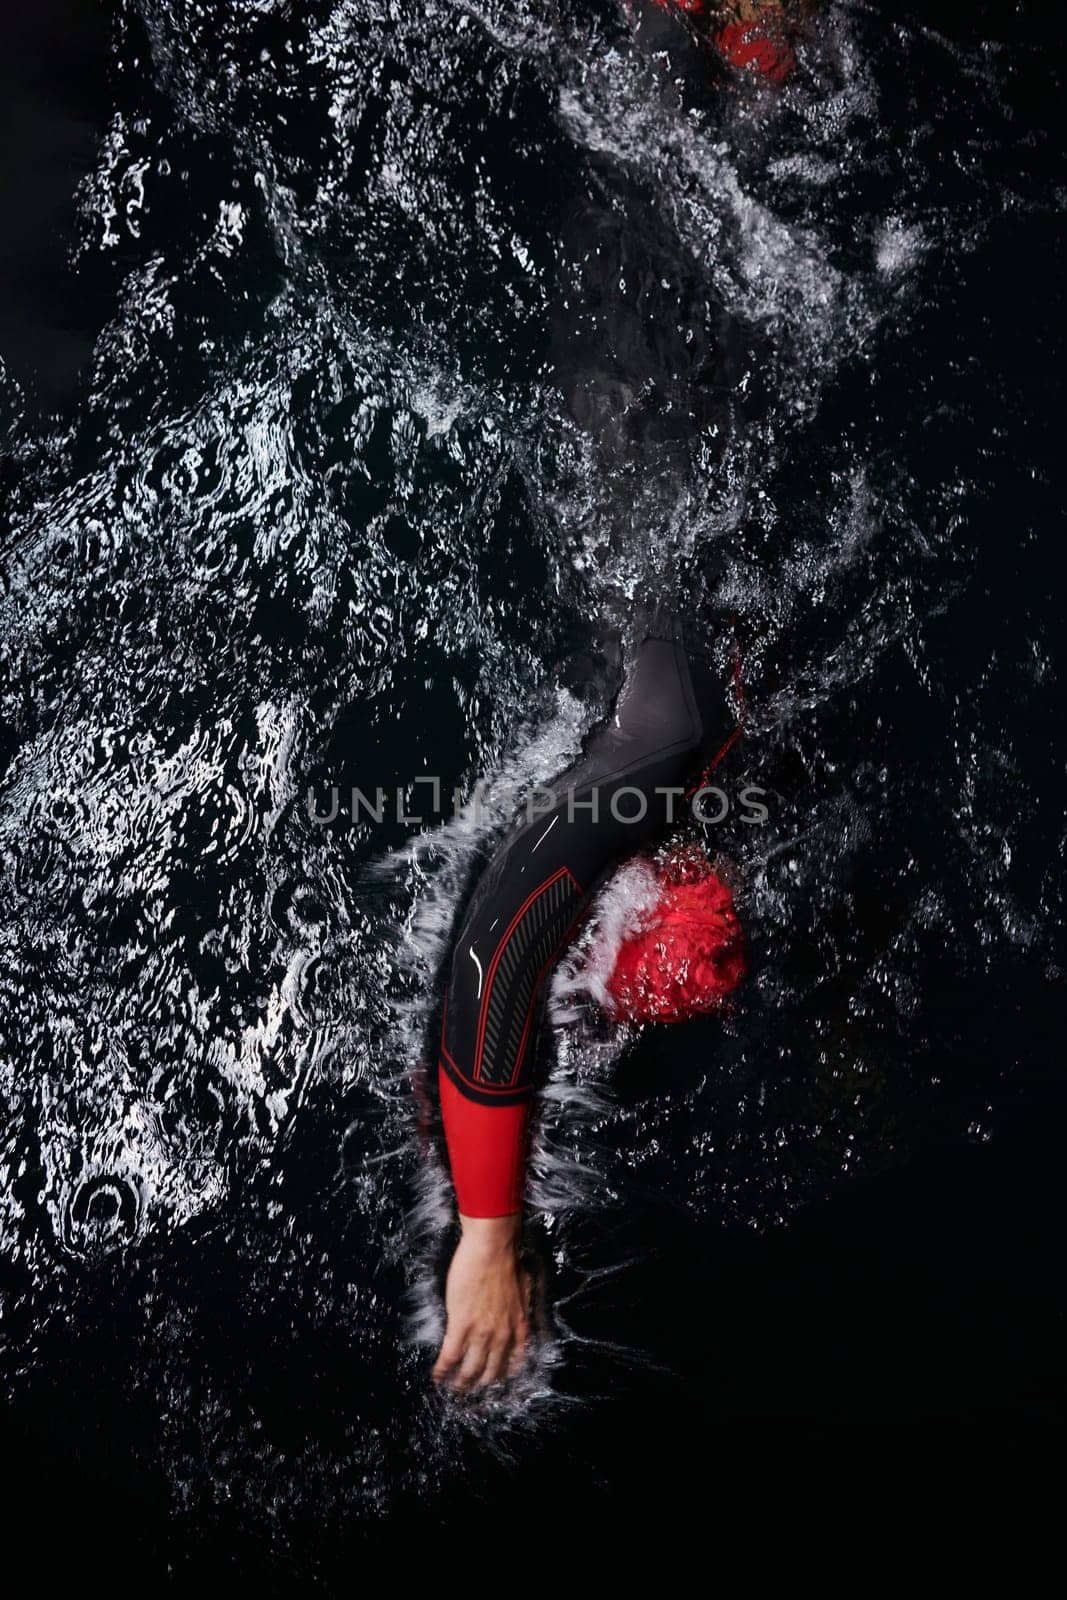 A determined professional triathlete undergoes rigorous night time training in cold waters, showcasing dedication and resilience in preparation for an upcoming triathlon swim competition by dotshock